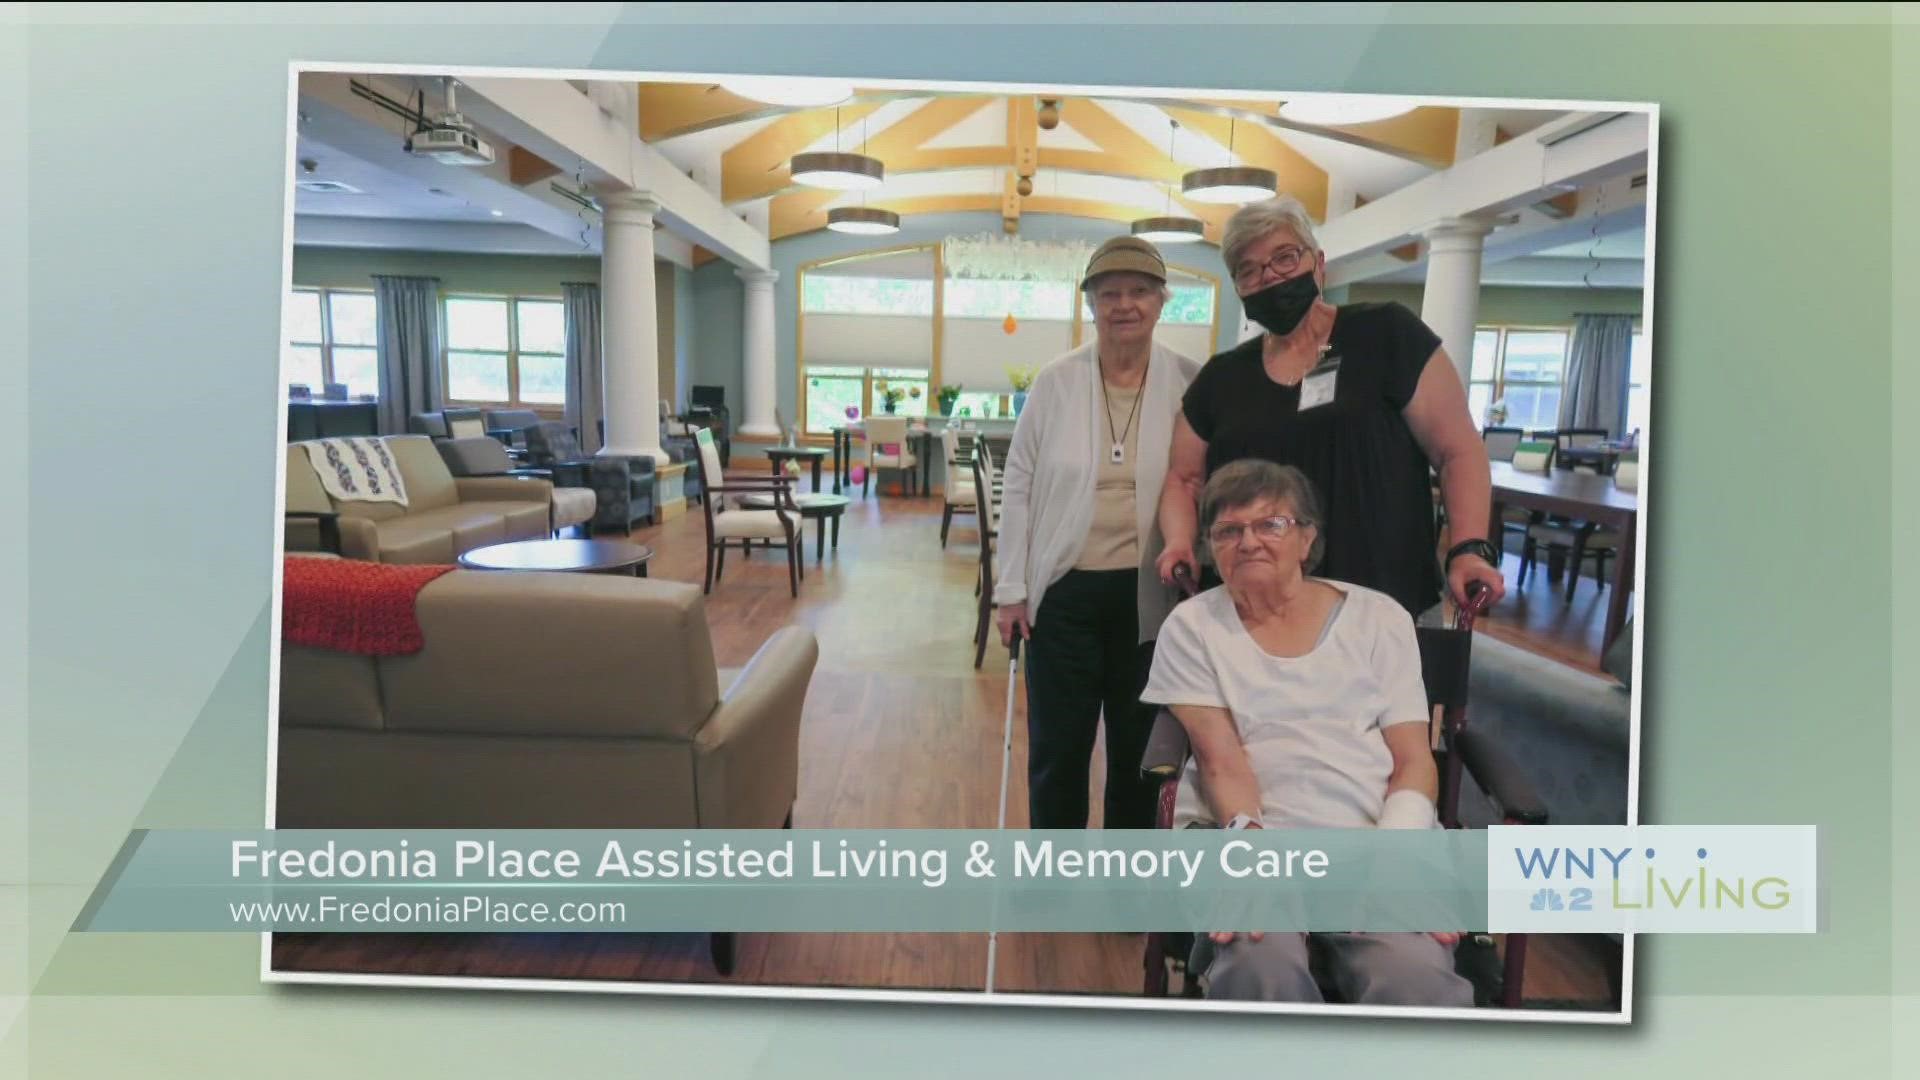 WNY Living - October 1 - Fredonia Place Assisted Living & Memory Care (THIS VIDEO IS SPONSORED BY FREDONIA PLACE ASSISTED LIVING & MEMORY CARE)